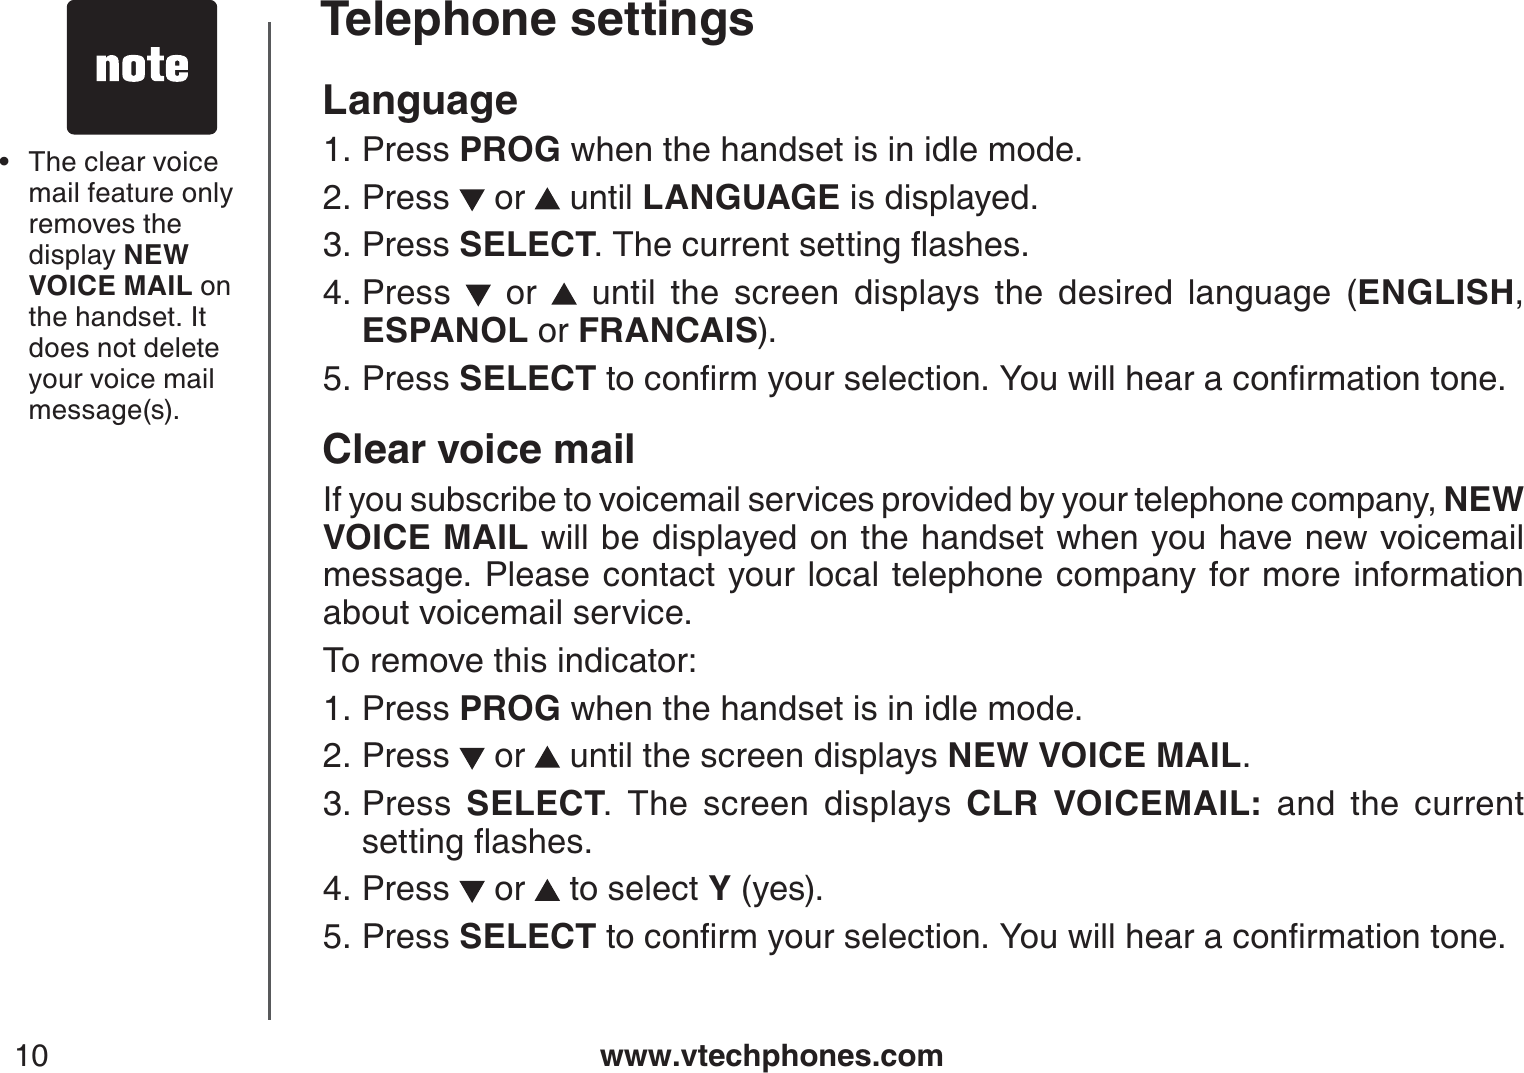 www.vtechphones.com10Telephone settingsLanguagePress PROG when the handset is in idle mode.Press   or   until LANGUAGE is displayed. Press SELECT6JGEWTTGPVUGVVKPIƀCUJGUPress   or   until the screen displays the desired language (ENGLISH,ESPANOL or FRANCAIS).Press SELECTVQEQPſTO[QWTUGNGEVKQP;QWYKNNJGCTCEQPſTOCVKQPVQPGClear voice mailIf you subscribe to voicemail services provided by your telephone company, NEW VOICE MAIL will be displayed on the handset when you have new voicemailmessage. Please contact your local telephone company for more information about voicemail service.To remove this indicator:Press PROG when the handset is in idle mode.Press   or   until the screen displays NEW VOICE MAIL.Press  SELECT. The screen displays CLR VOICEMAIL: and the current UGVVKPIƀCUJGUPress   or   to select Y(yes).Press SELECTVQEQPſTO[QWTUGNGEVKQP;QWYKNNJGCTCEQPſTOCVKQPVQPG1.2.3.4.5.1.2.3.4.5.The clear voice mail feature only removes the display NEW VOICE MAIL on the handset. It does not delete your voice mailmessage(s).•